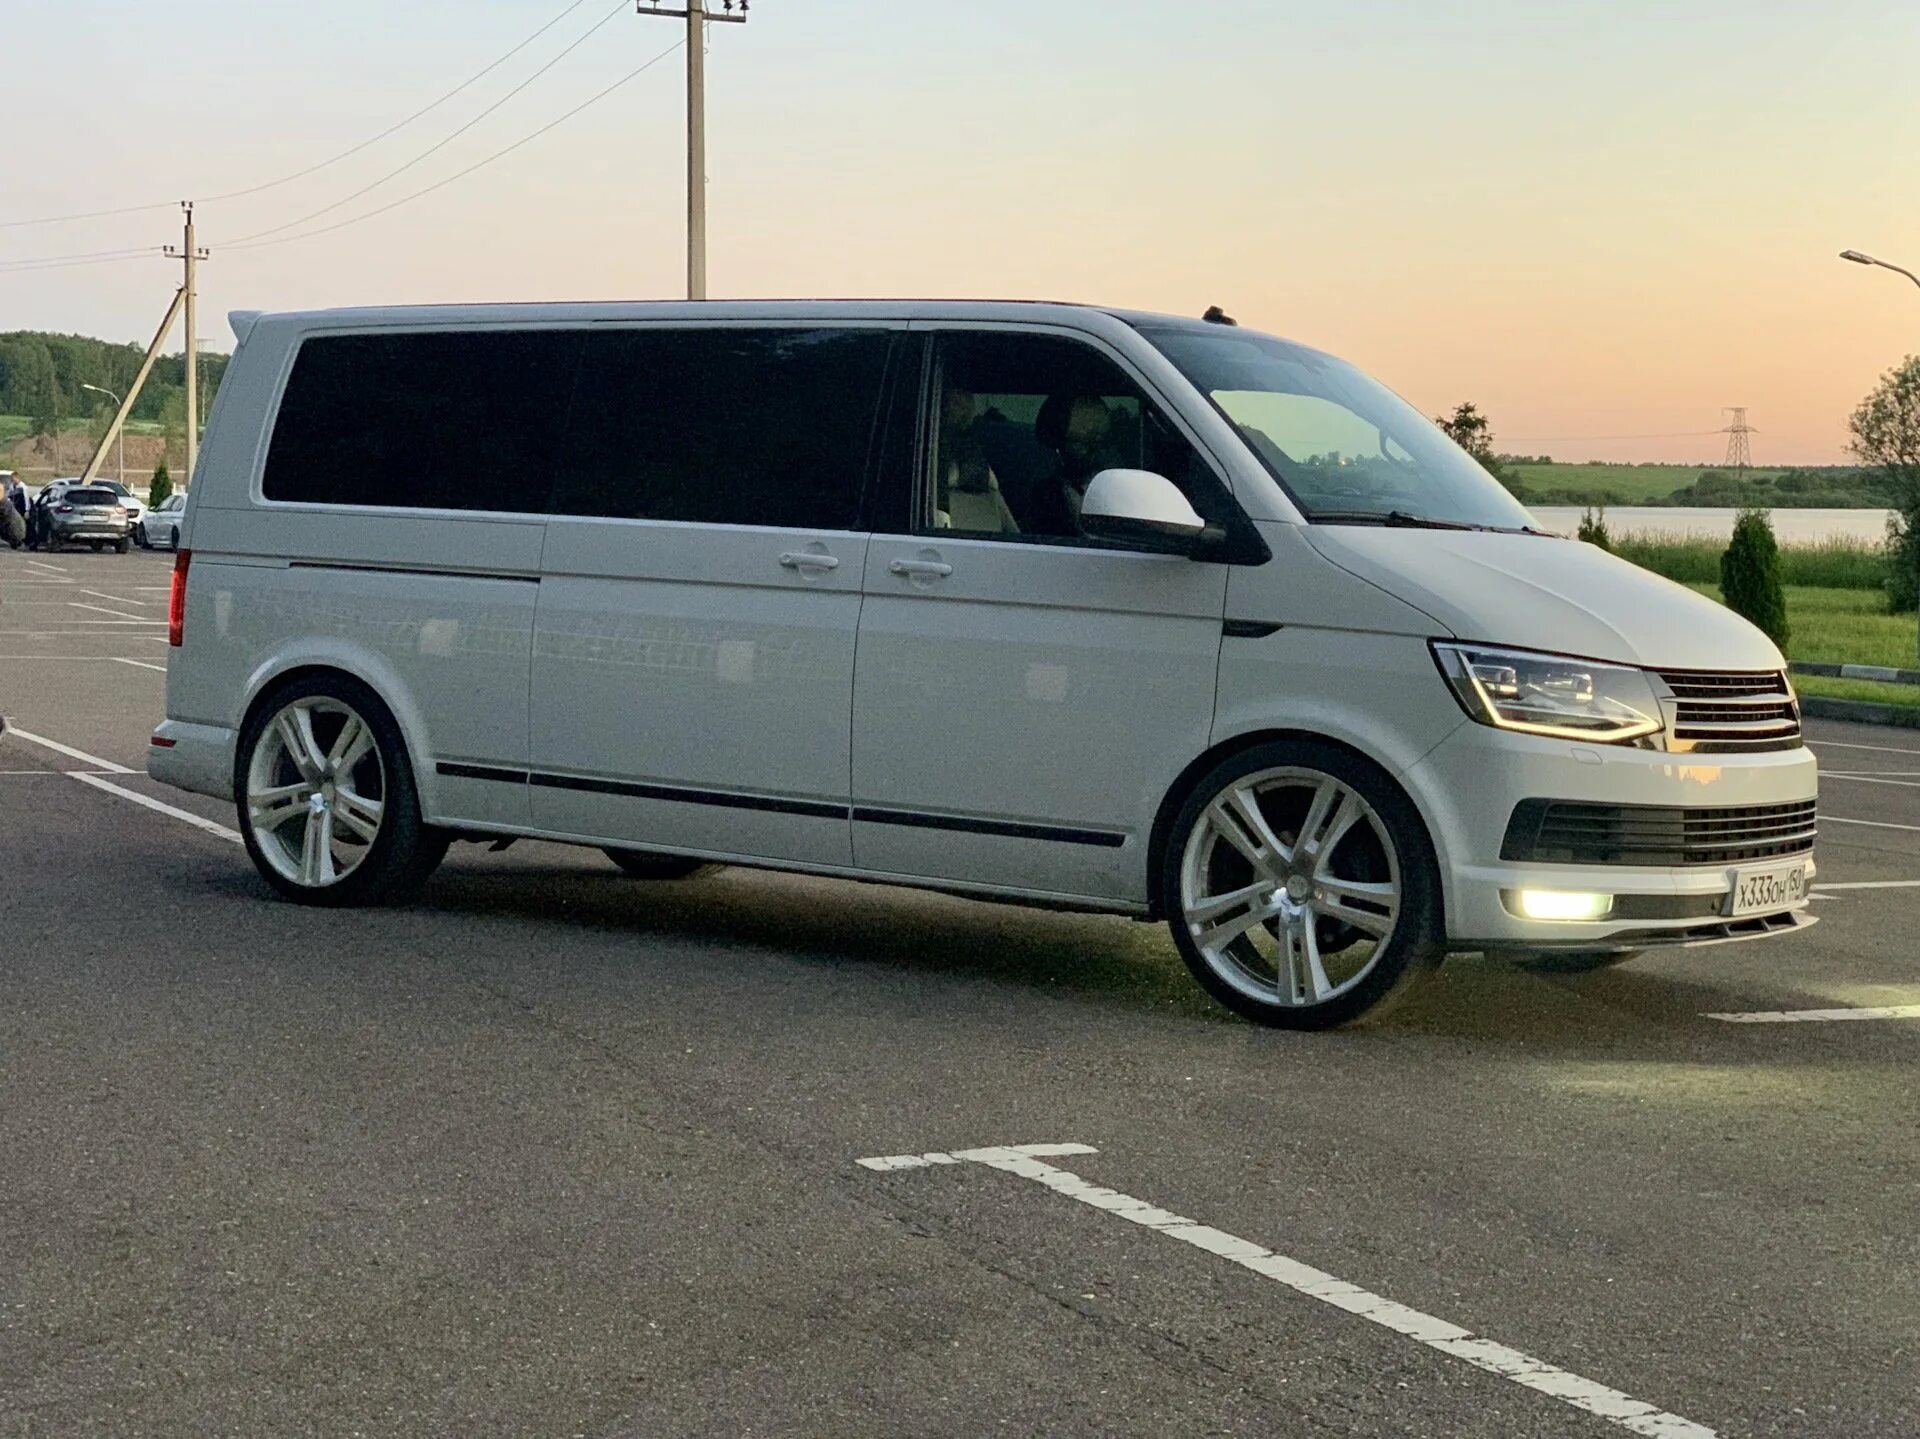 Т 6 2014. Tuning VW Caravelle t6. Фольксваген Каравелла 2021. Фольксваген Каравелла 6.1. Volkswagen Caravelle t6 белый.